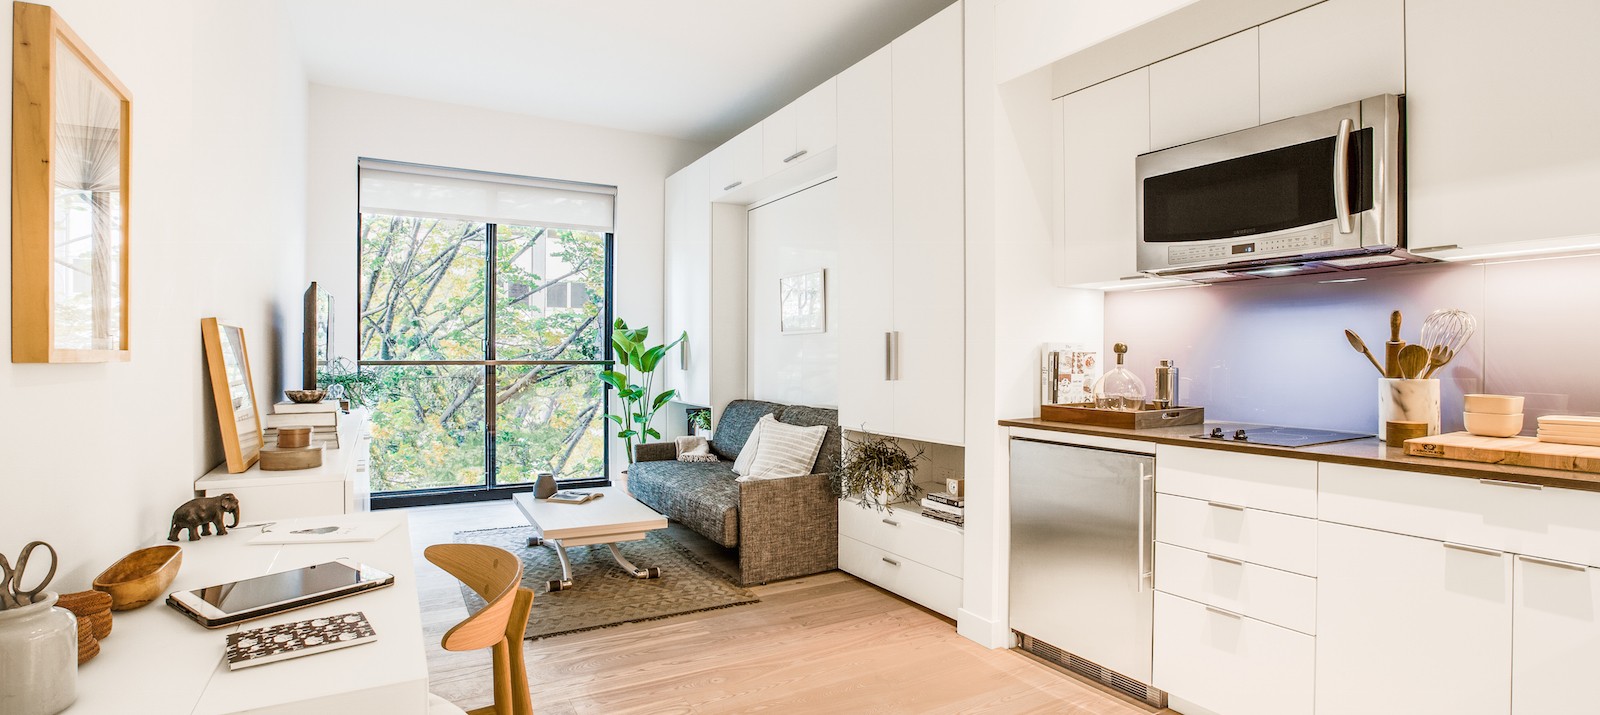 The clean, minimal, and furnished interior of Carmel Place, NYC's first micro-apartment building, which is located at 335 E 27th St in Kips Bay, Manhattan.